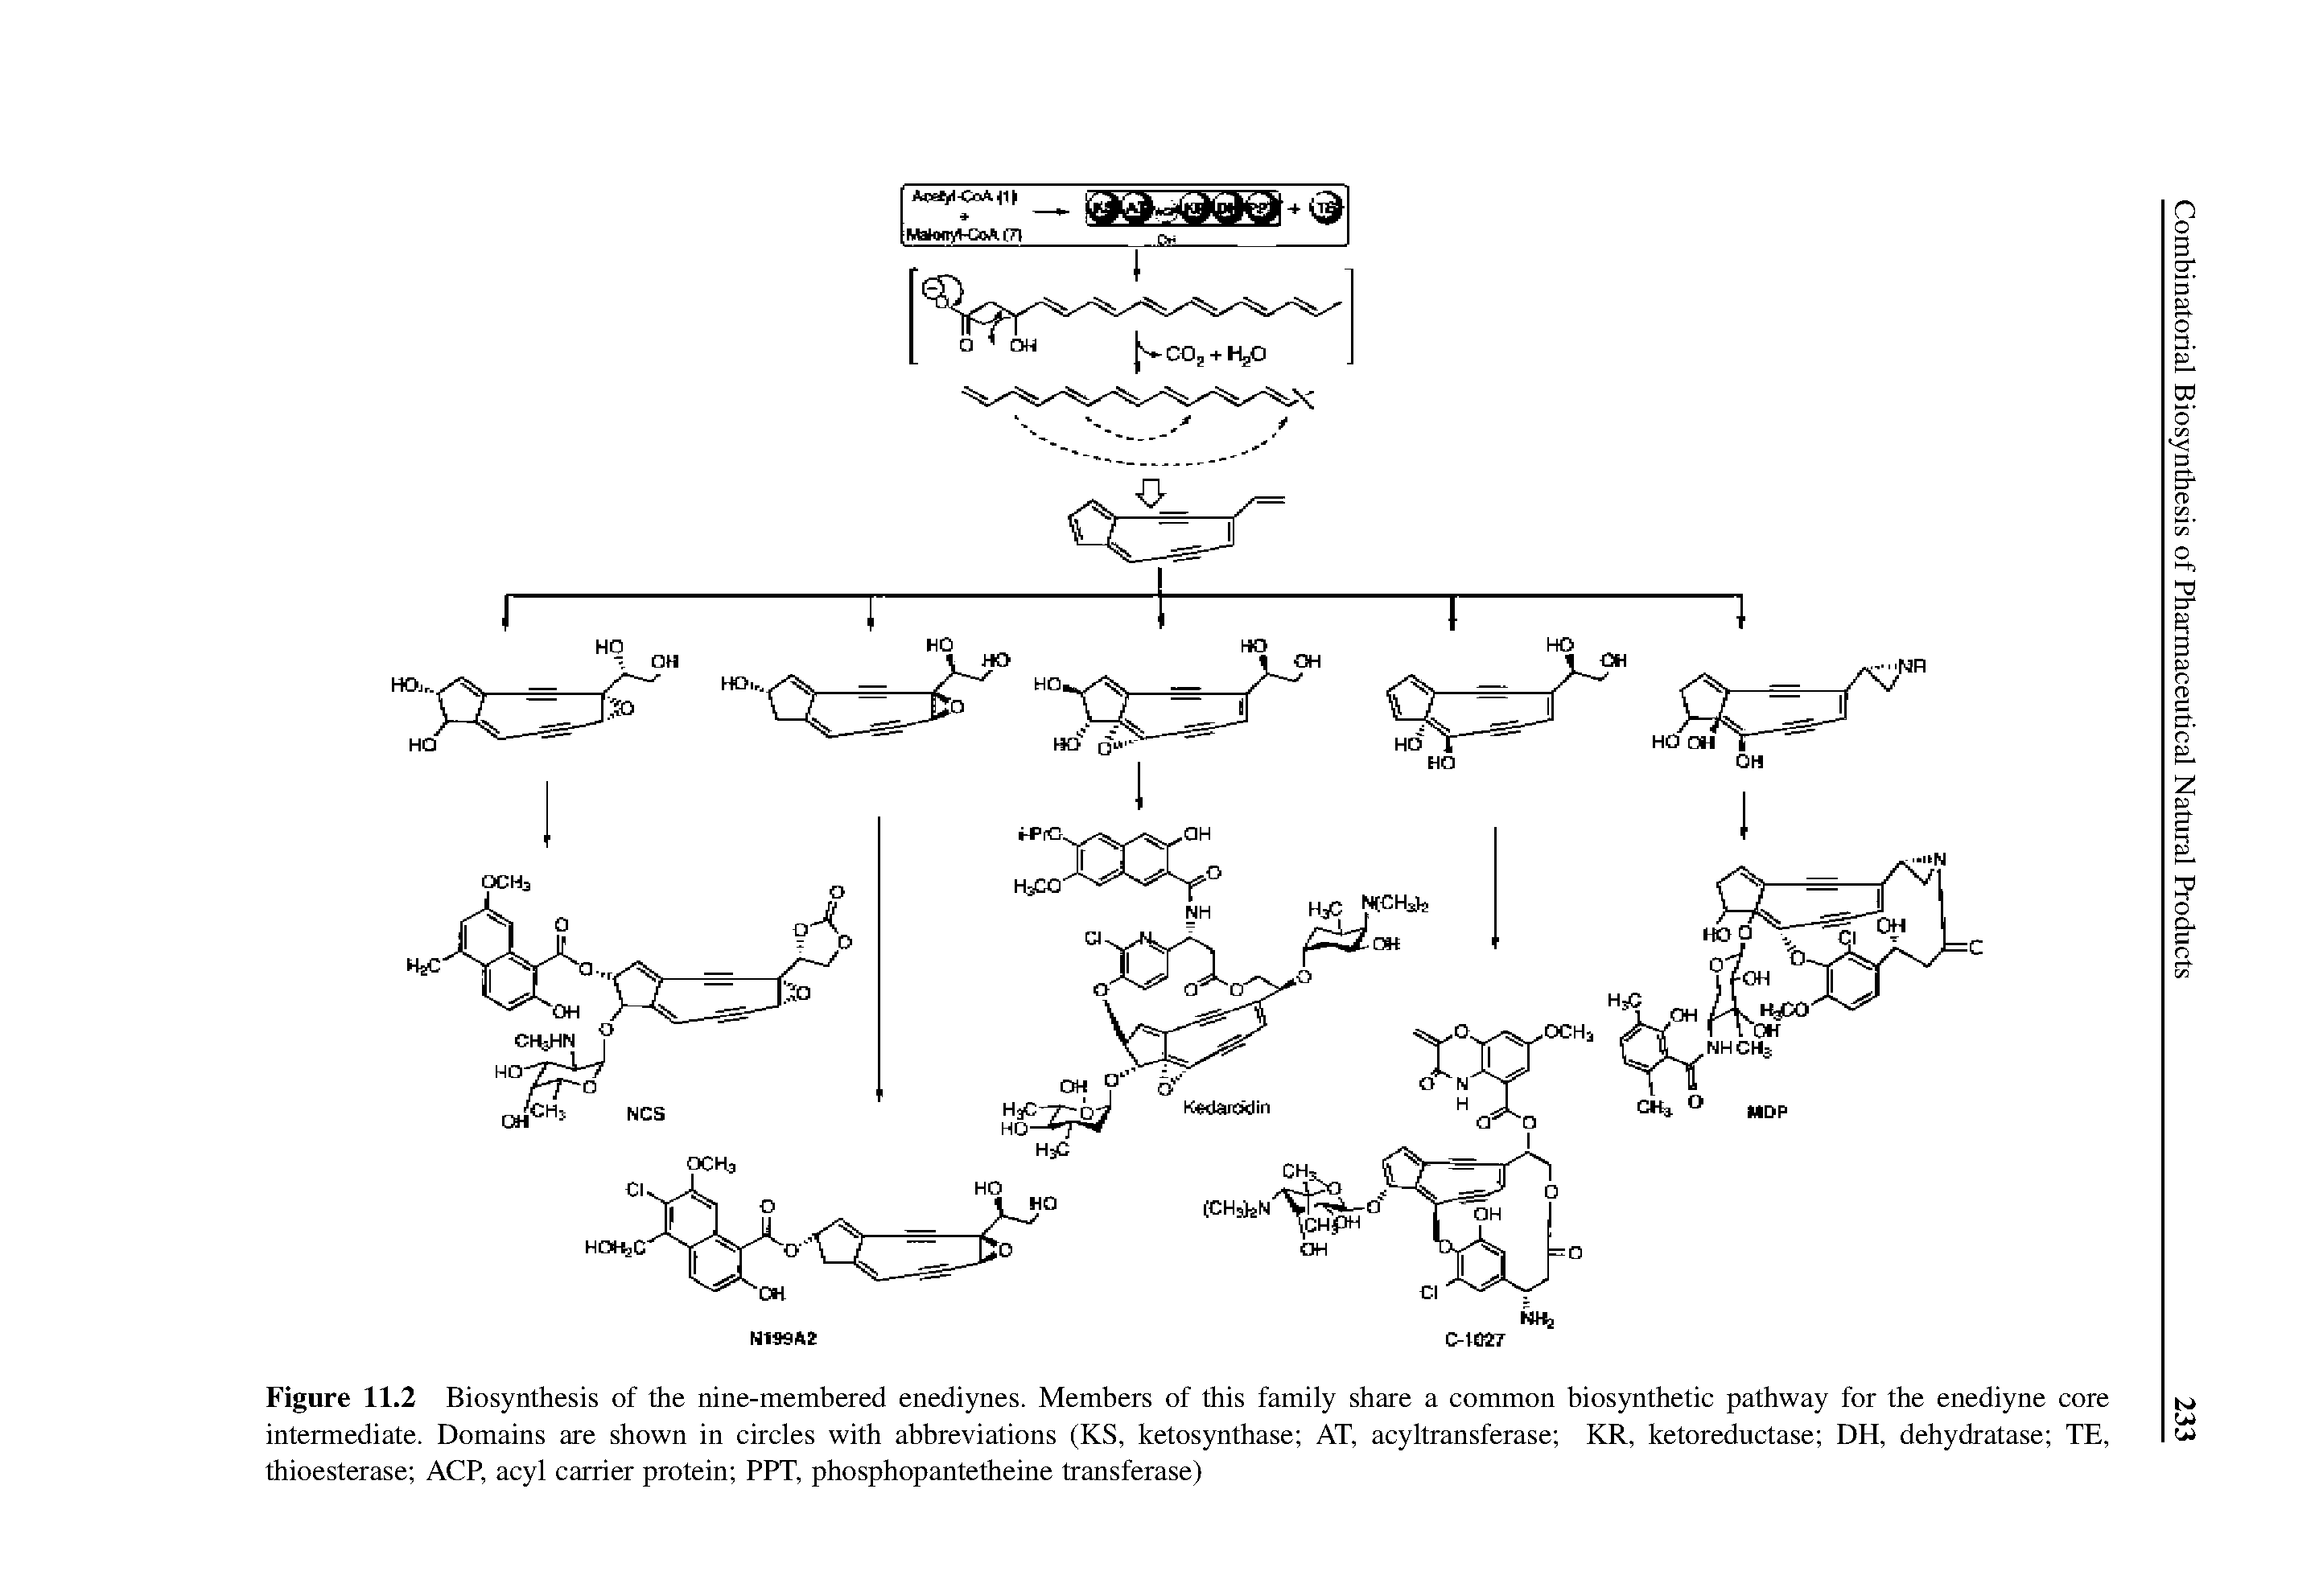 Figure 11.2 Biosynthesis of the nine-membered enediynes. Members of this family share a common biosynthetic pathway for the enediyne core intermediate. Domains are shown in circles with abbreviations (KS, ketosynthase AT, acyltransferase KR, ketoreductase DH, dehydratase TE, thioesterase ACP, acyl carrier protein PPT, phosphopantetheine transferase)...